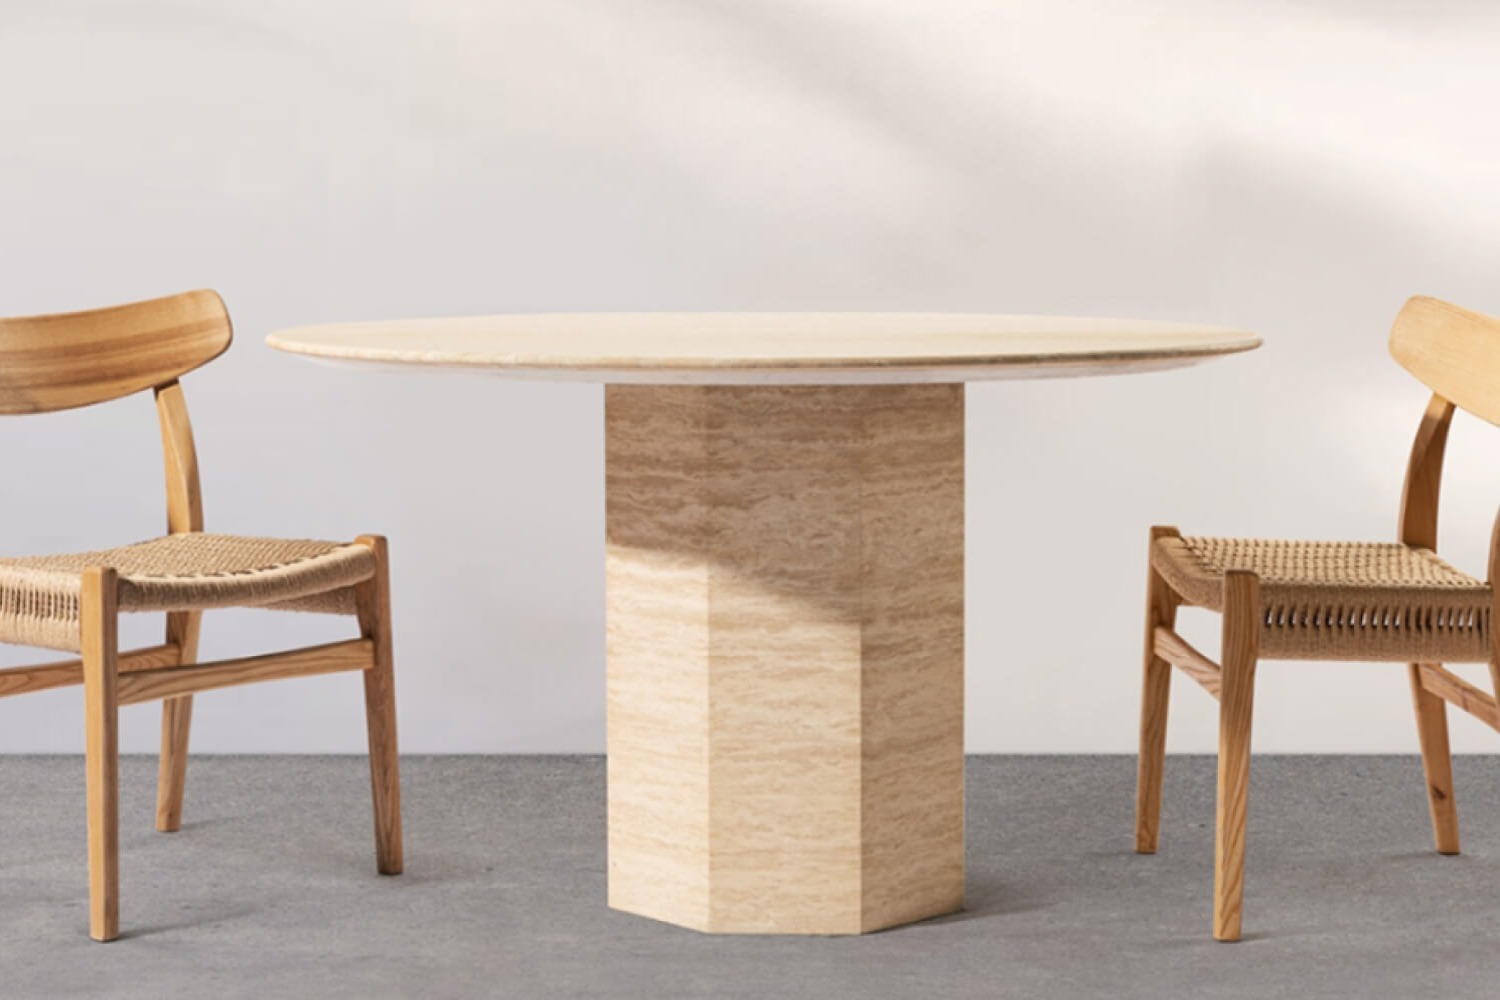 The 'Picco Round Beige Travertine Dining Table with Hexagon Base' is positioned between two woven chairs. The table's unique hexagonal base and smooth round top exhibit a natural stone pattern, offering a blend of geometric design and organic textures.